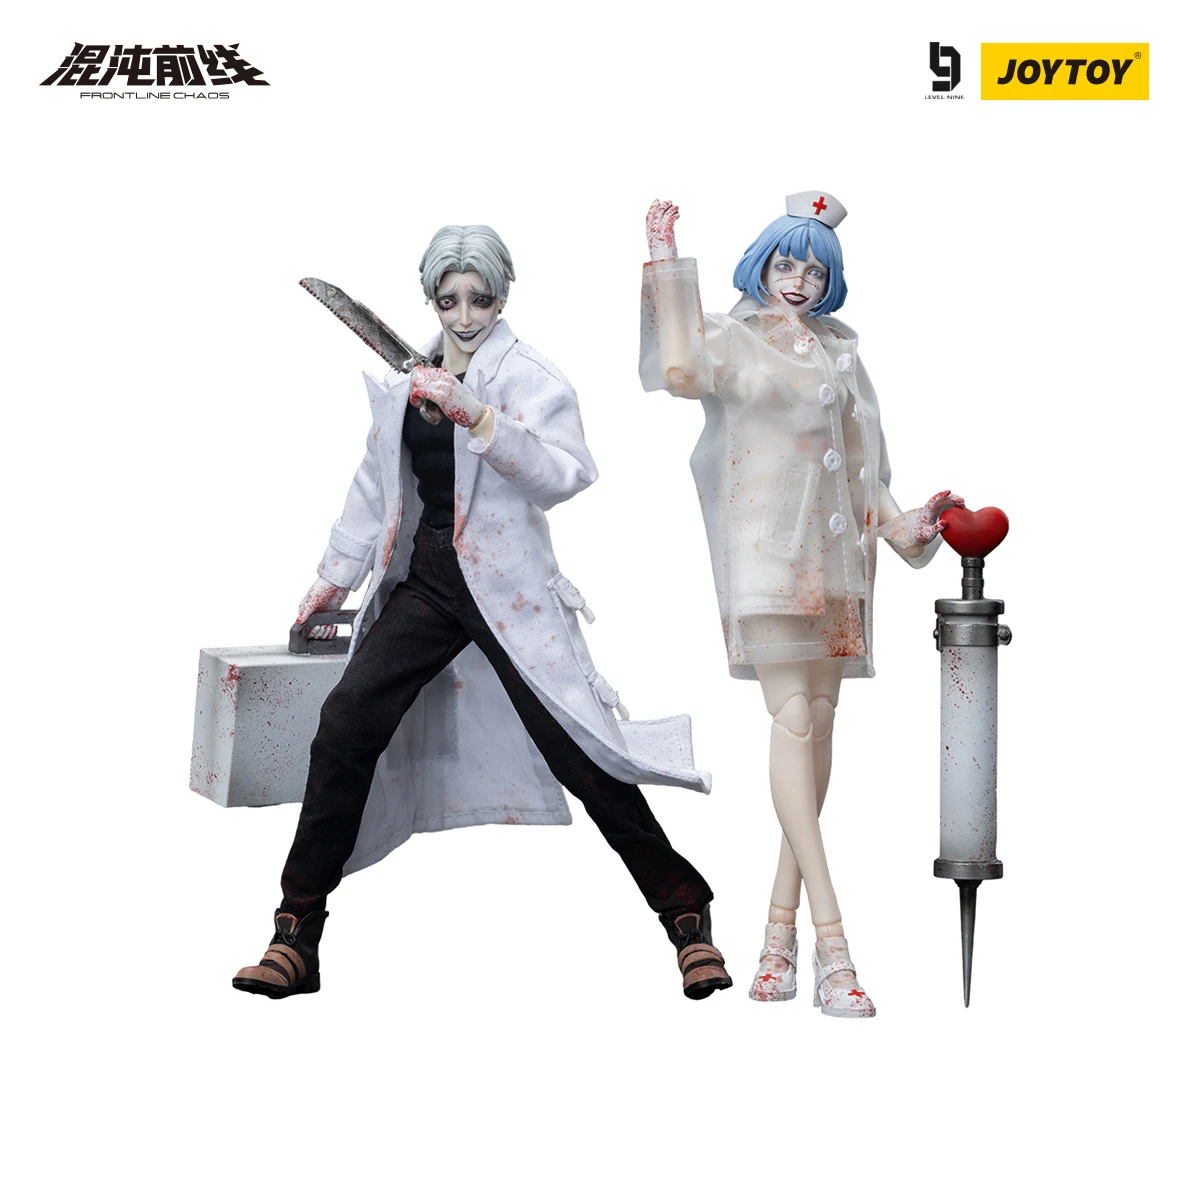 

[IN-STOCK] JOYTOY Level Nine 1/12 Action Figure FRONTLINE CHAOS DR.WHITE And NO.77 Anime Military Model Free Shipping